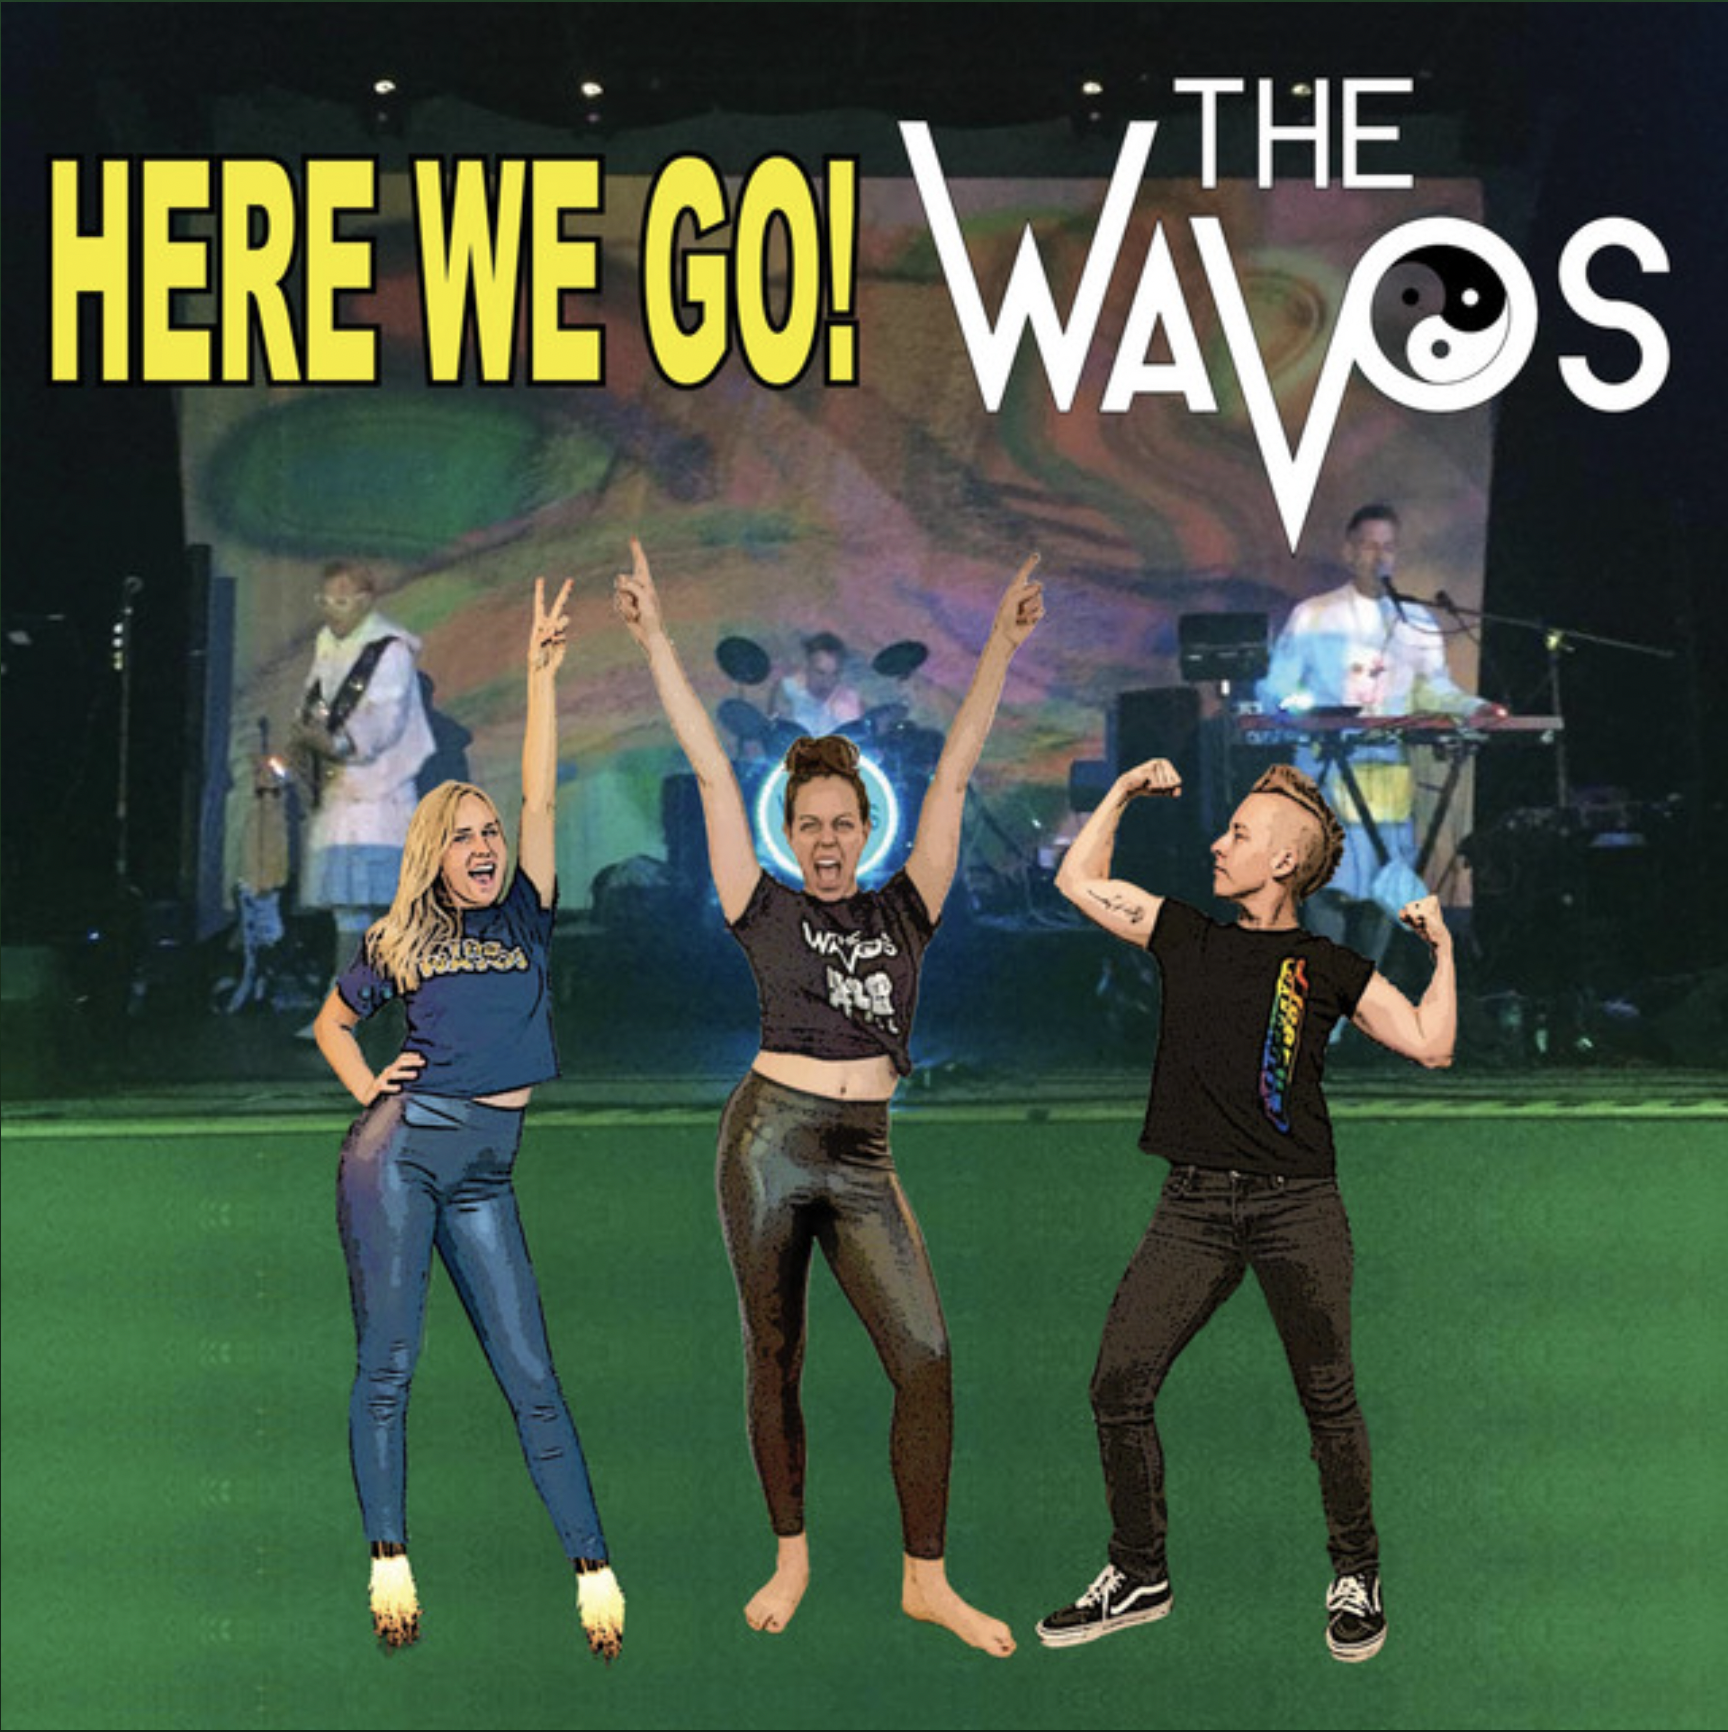 Here We Go! (Original Single) By The Wavos